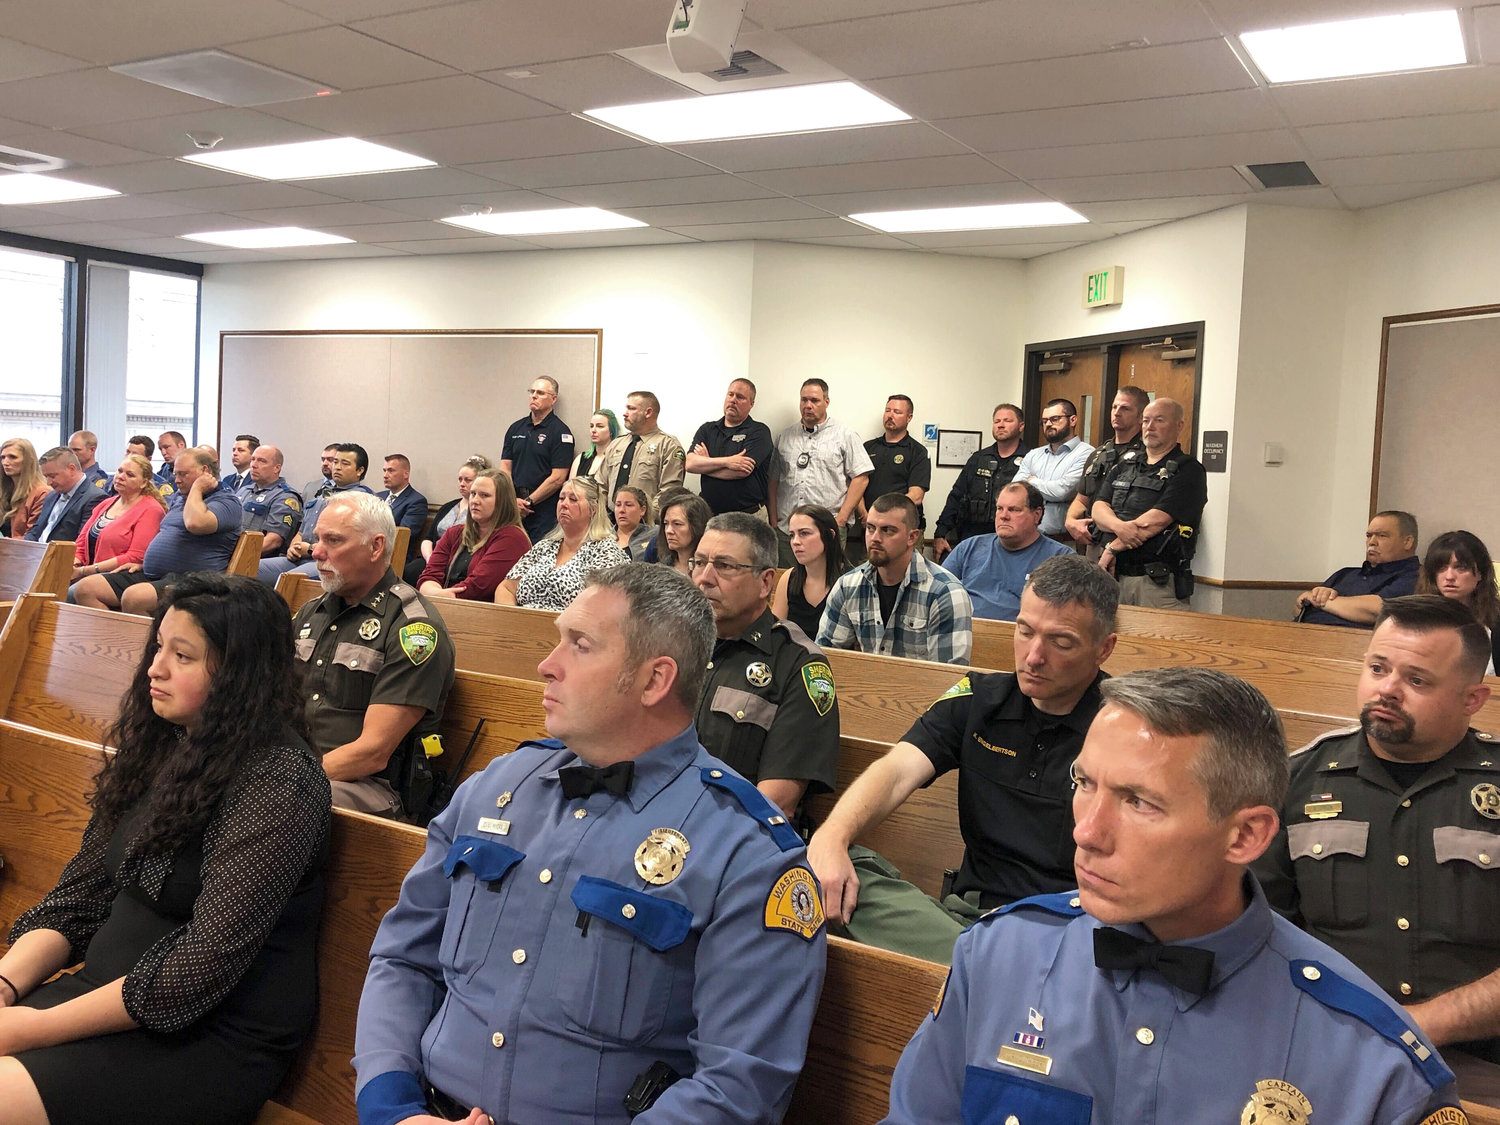 Members of the community and local law enforcement fill the courtroom during William Thompson’s sentencing hearing in Chehalis on Tuesday. Thompson was convicted June 21 for the murder of Washington State Patrol Trooper Justin Schaffer.